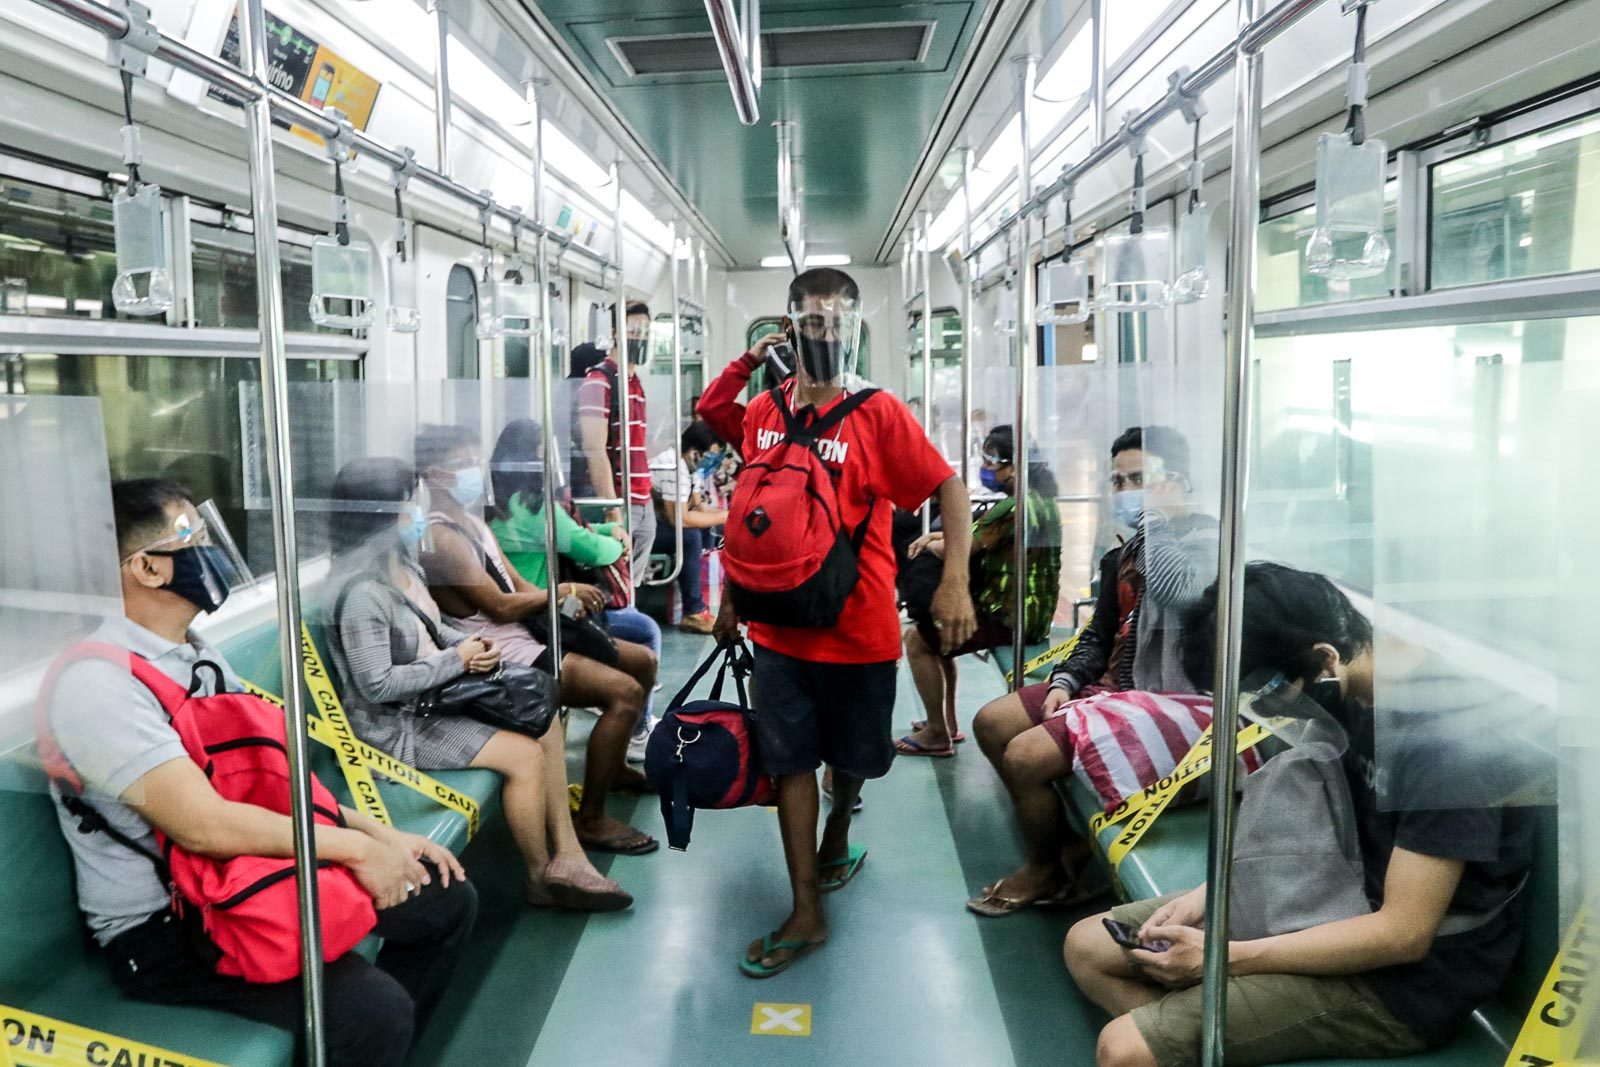 Reduced distancing in public transport based on ‘science’ – DOTr